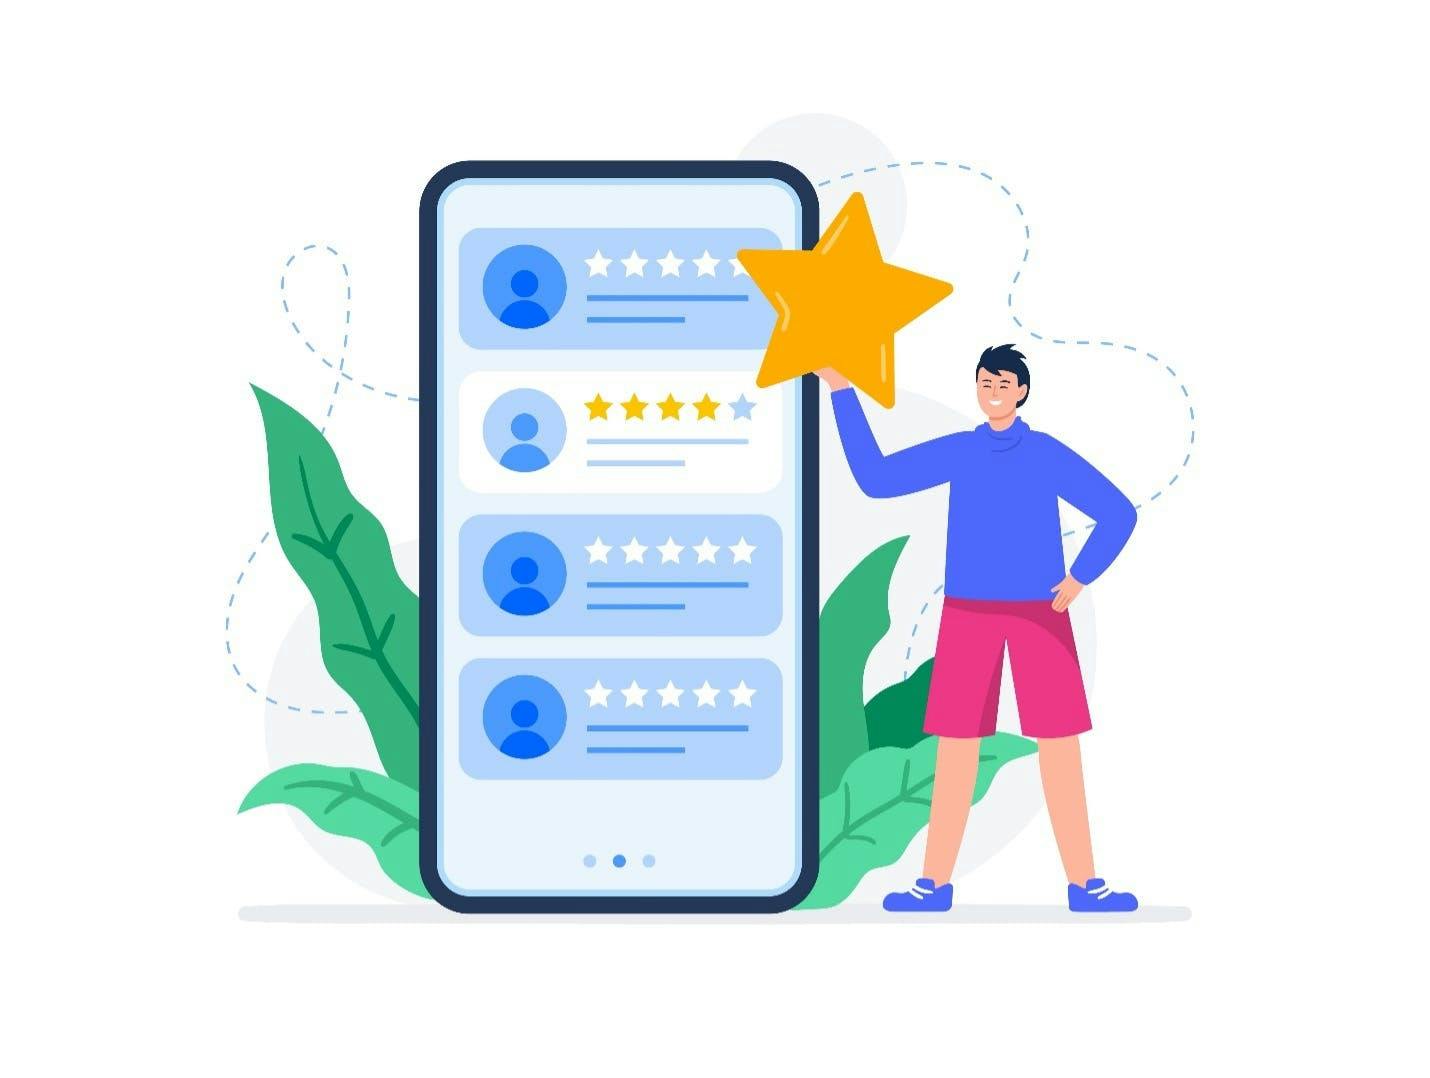 A cartoon drawing of a person leaving a 4-star customer review next to a gaint cell phone